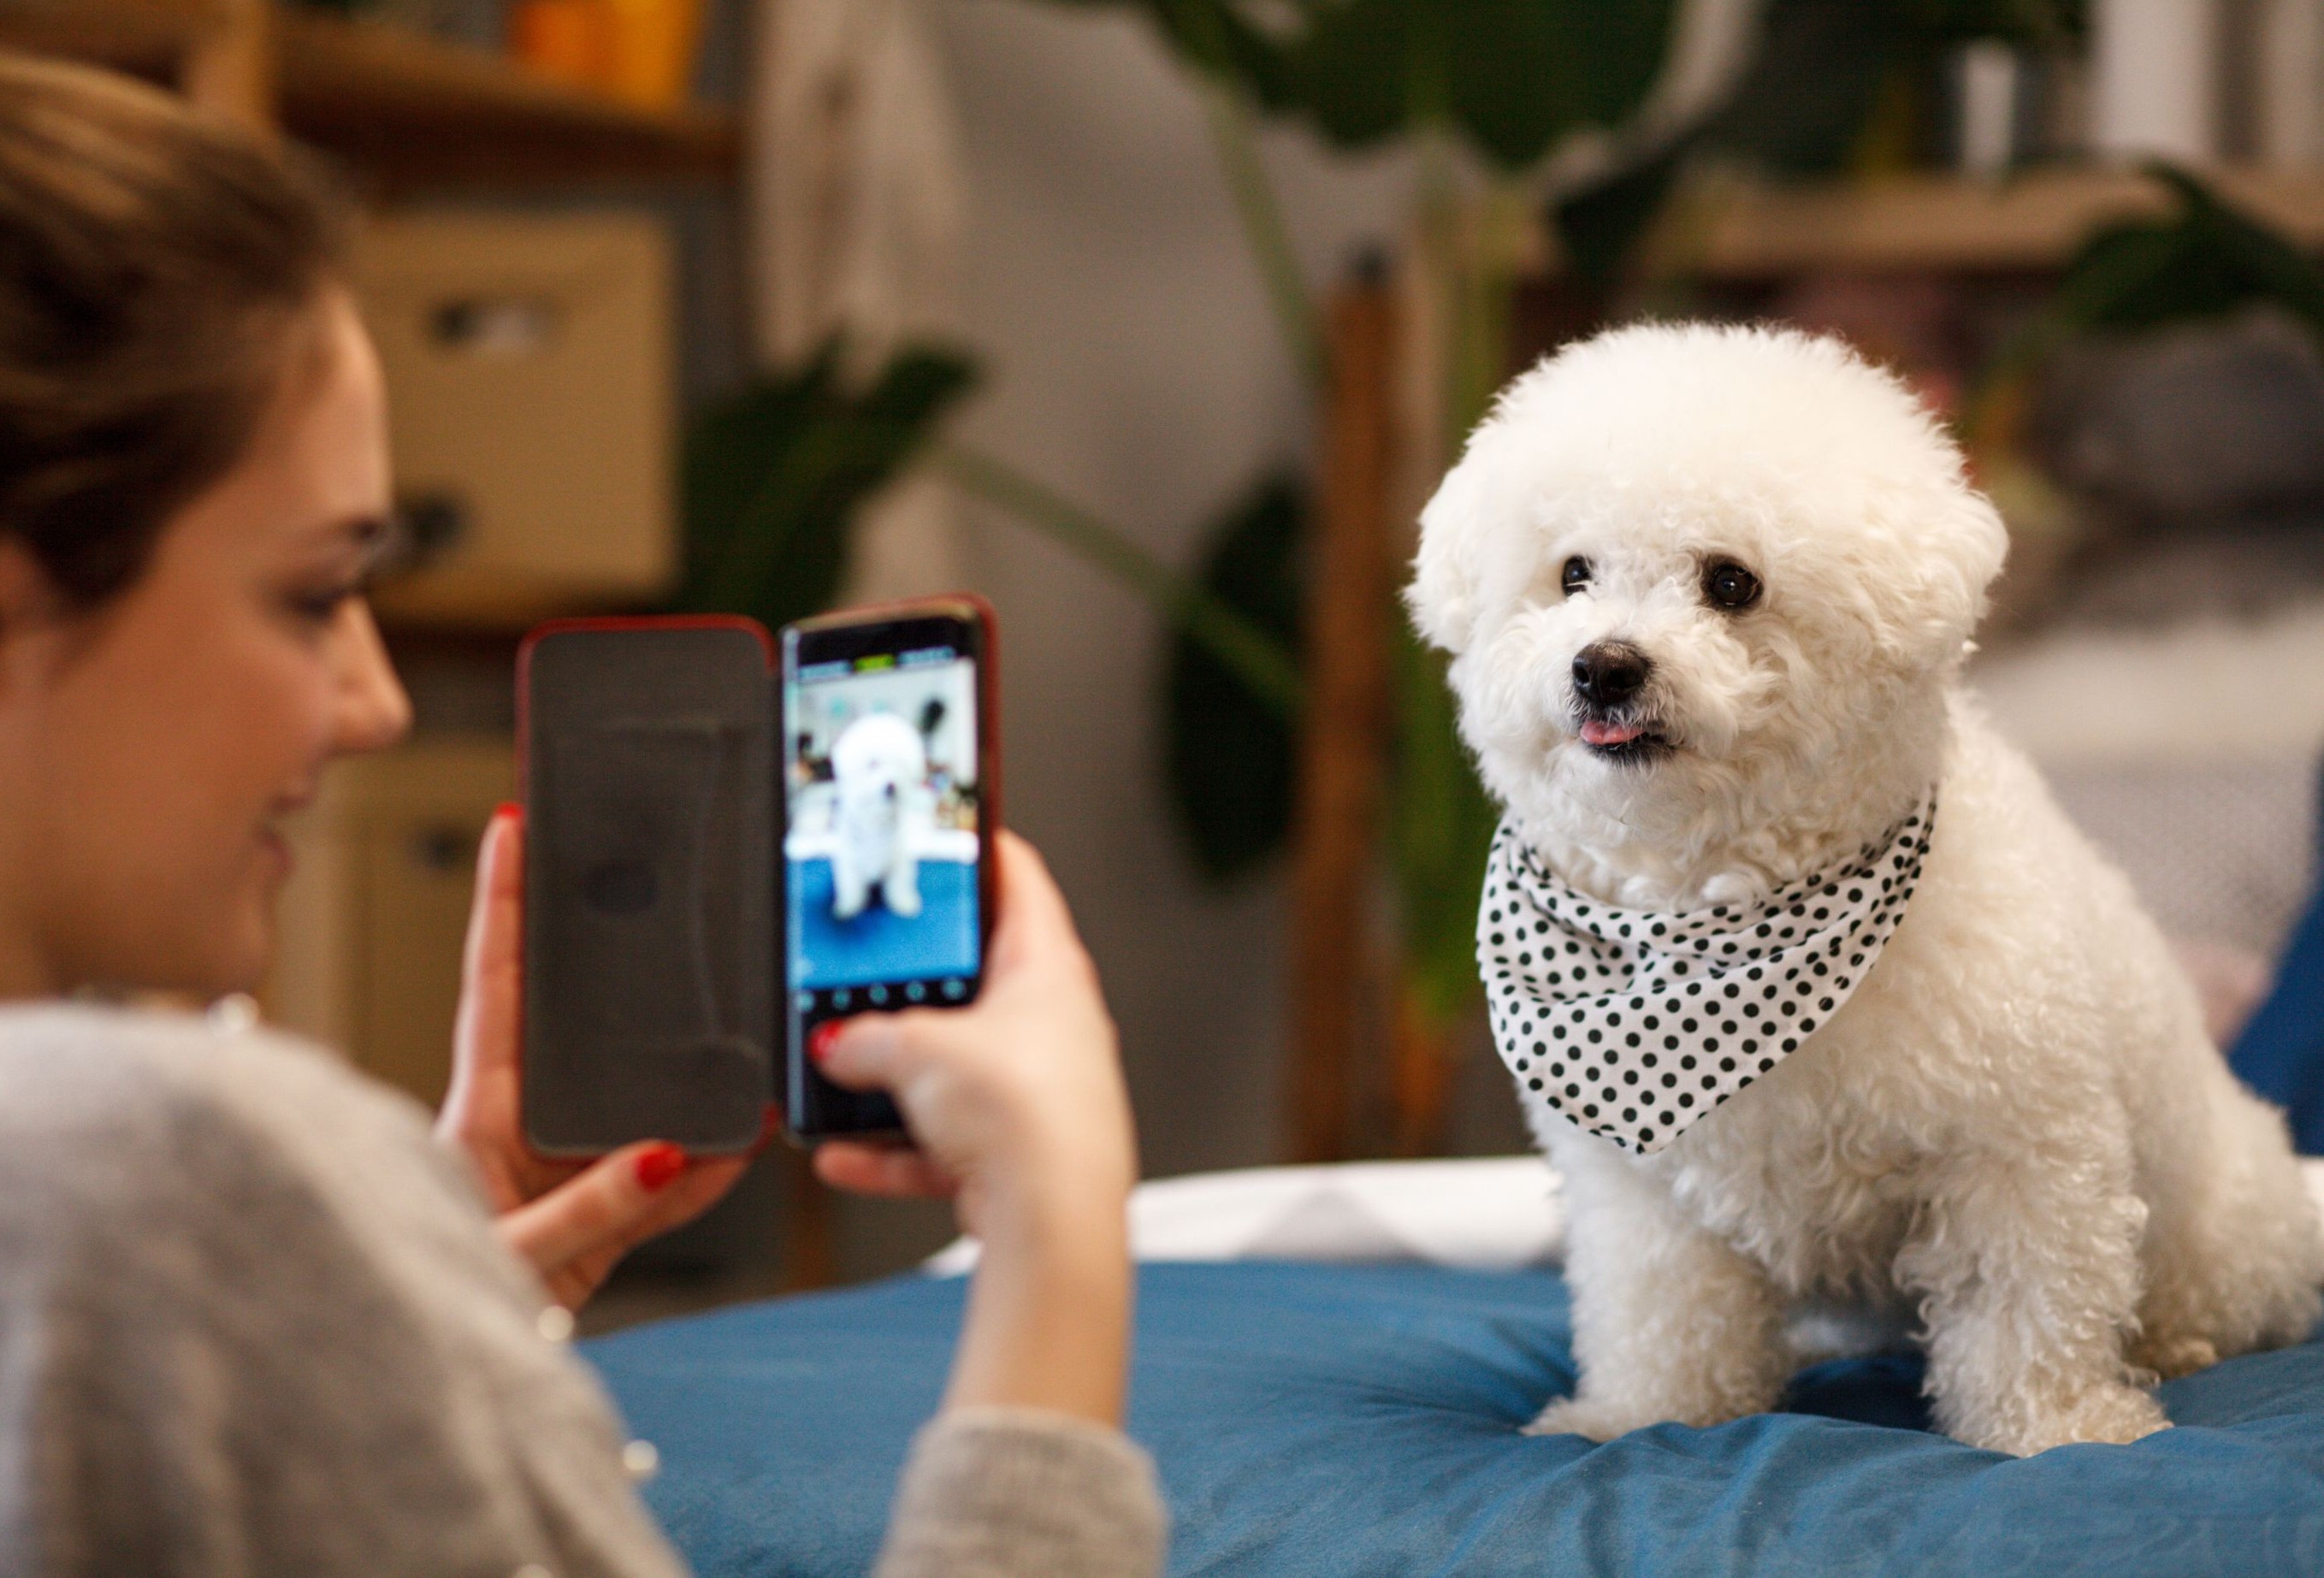 Dog Photo Tips: How to Take the Perfect Photo of Your Pup